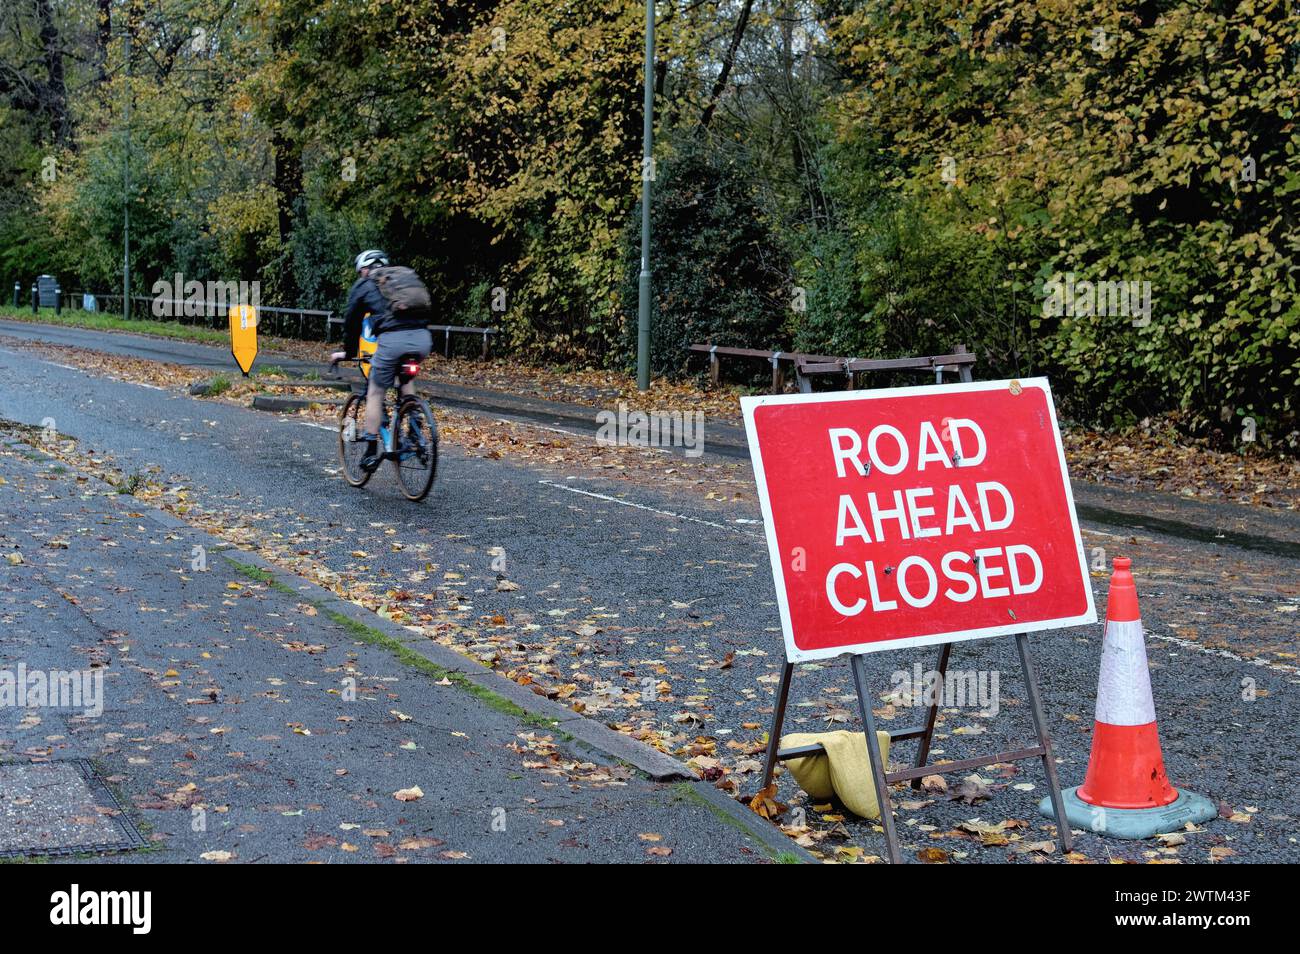 A cyclist passing a large 'Road Ahead Closed' sign on a urban road in Shepperton Surrey England UK Stock Photo